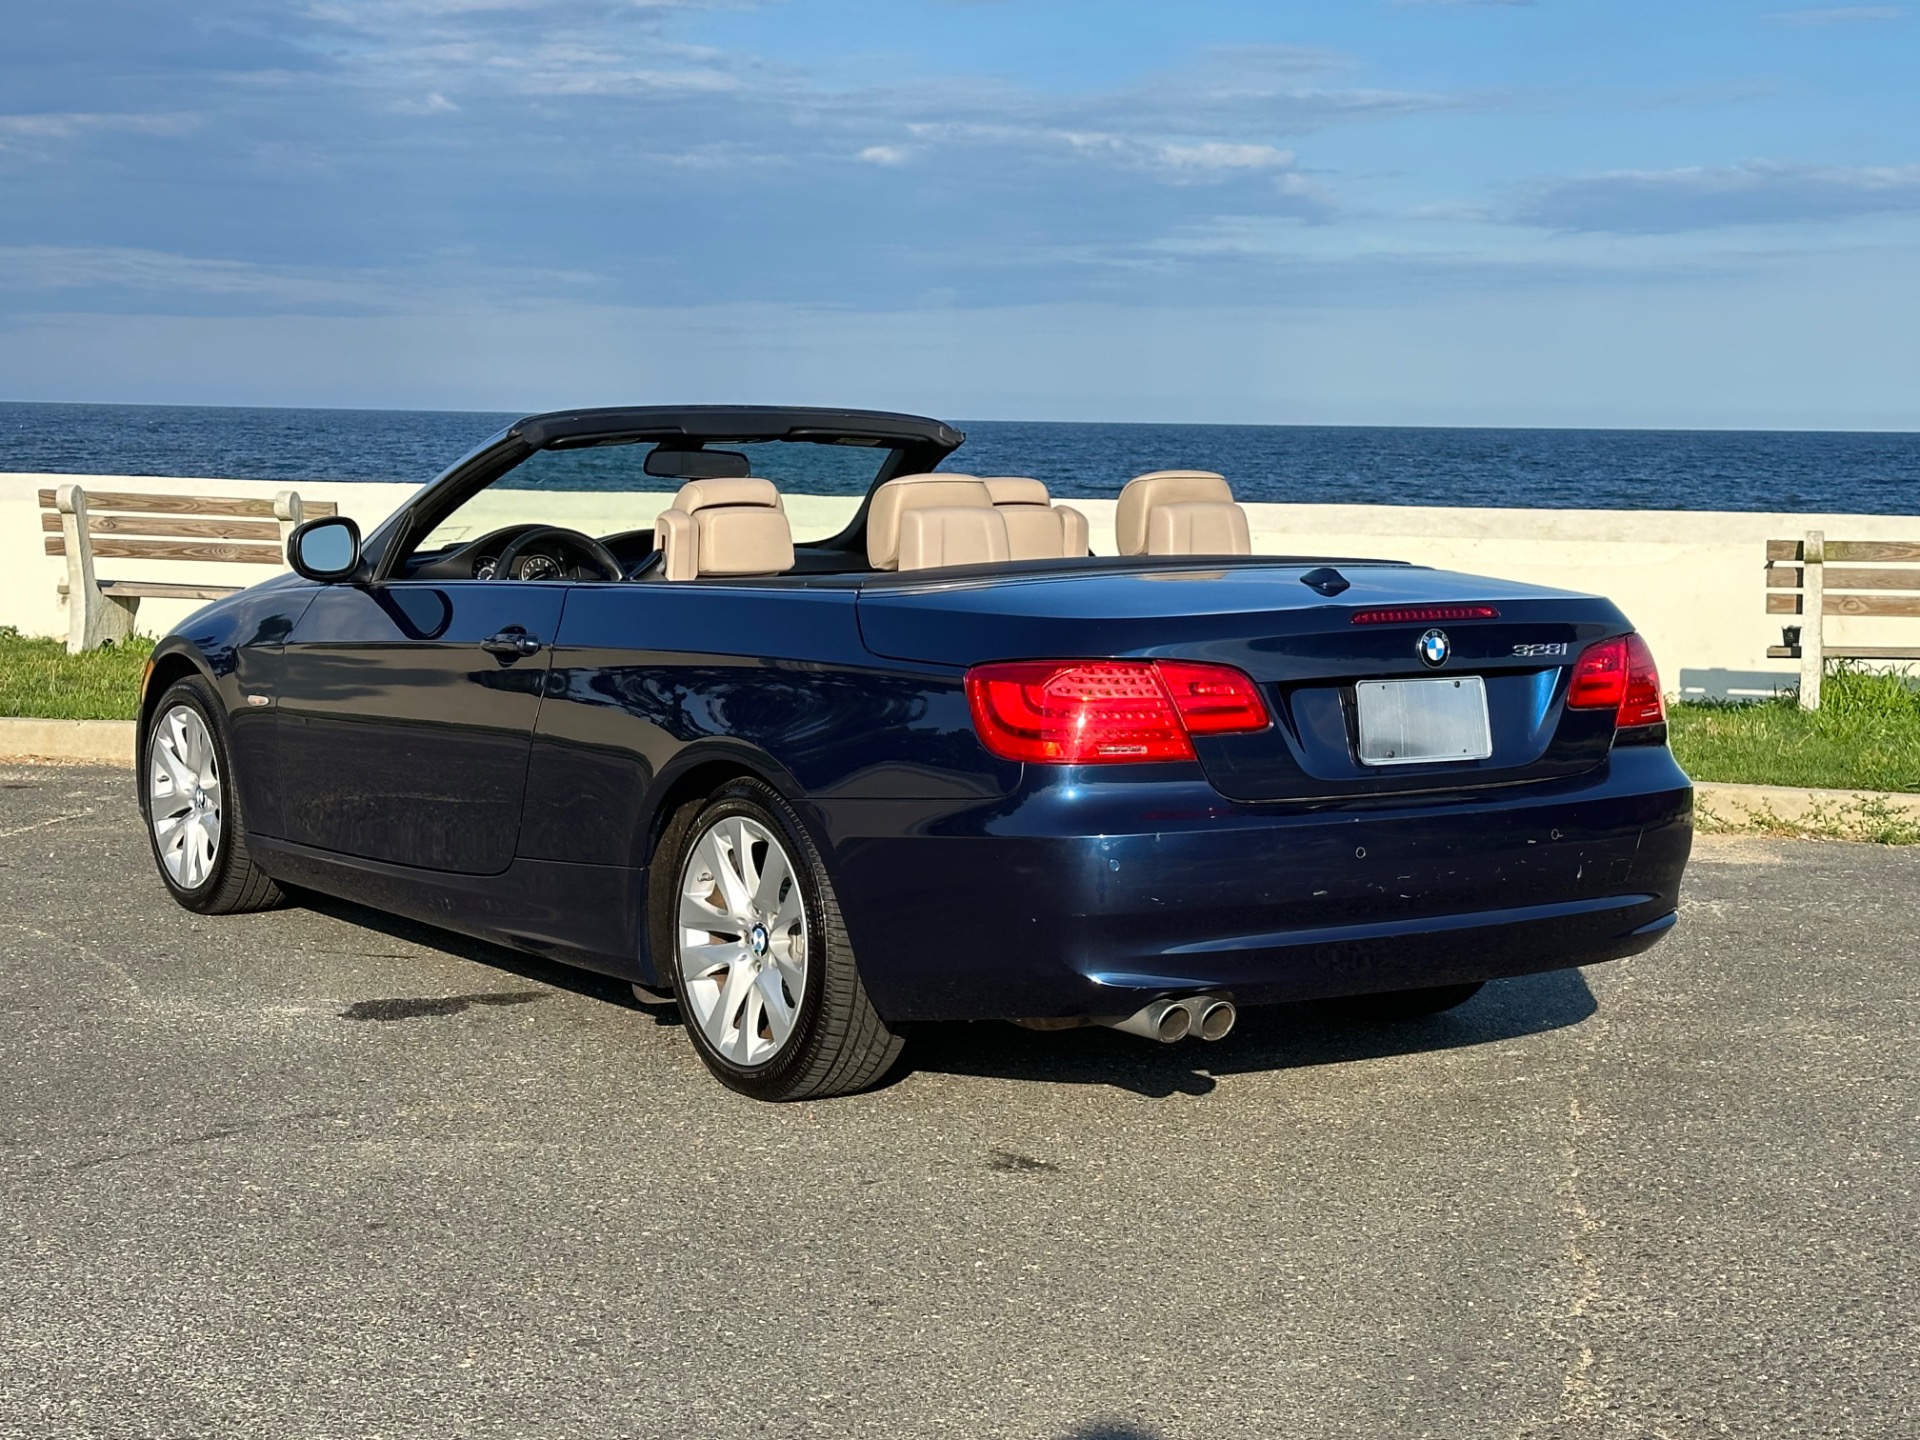 Used-2011-BMW-328i-Convertible-6-Speed-328i